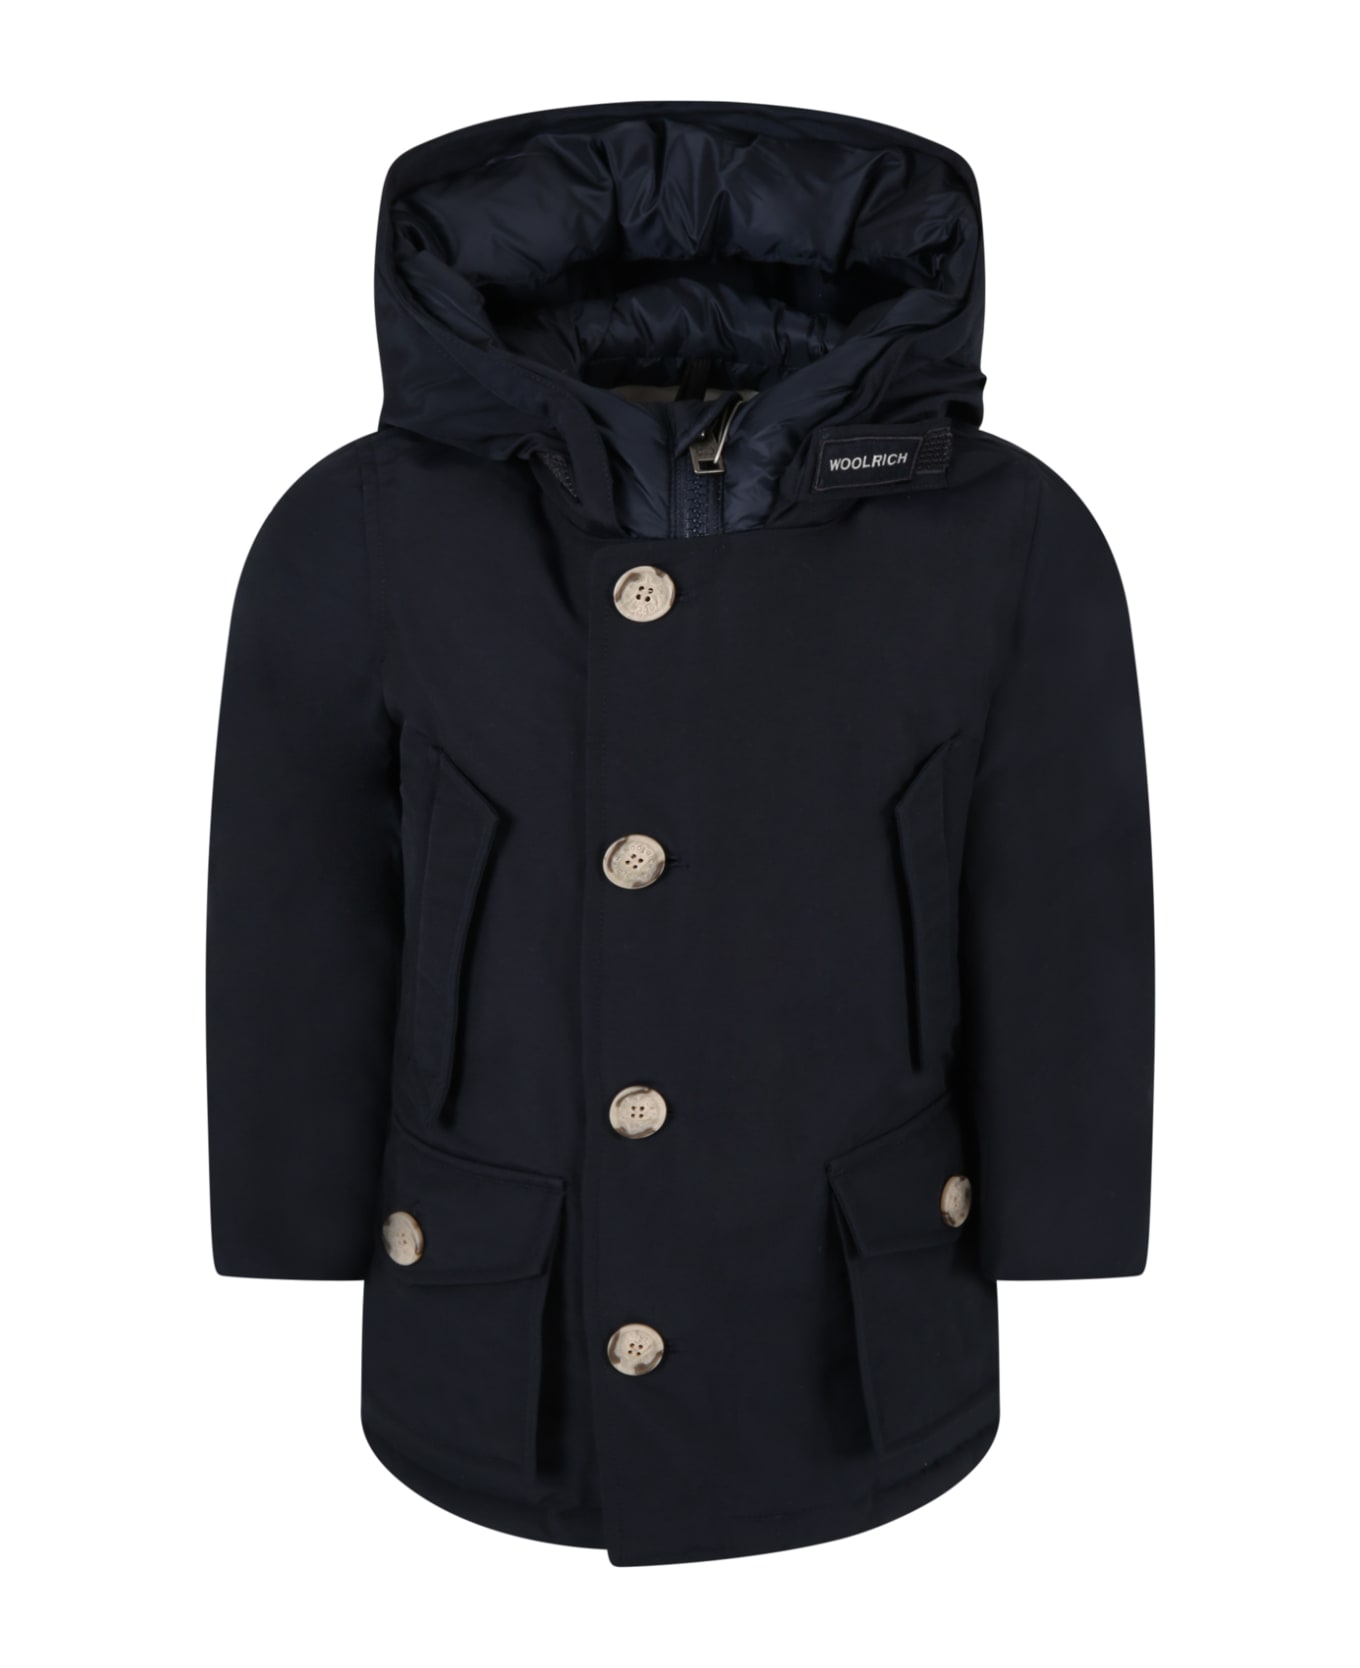 Woolrich Blue Jacket For Boy With Logo - Black